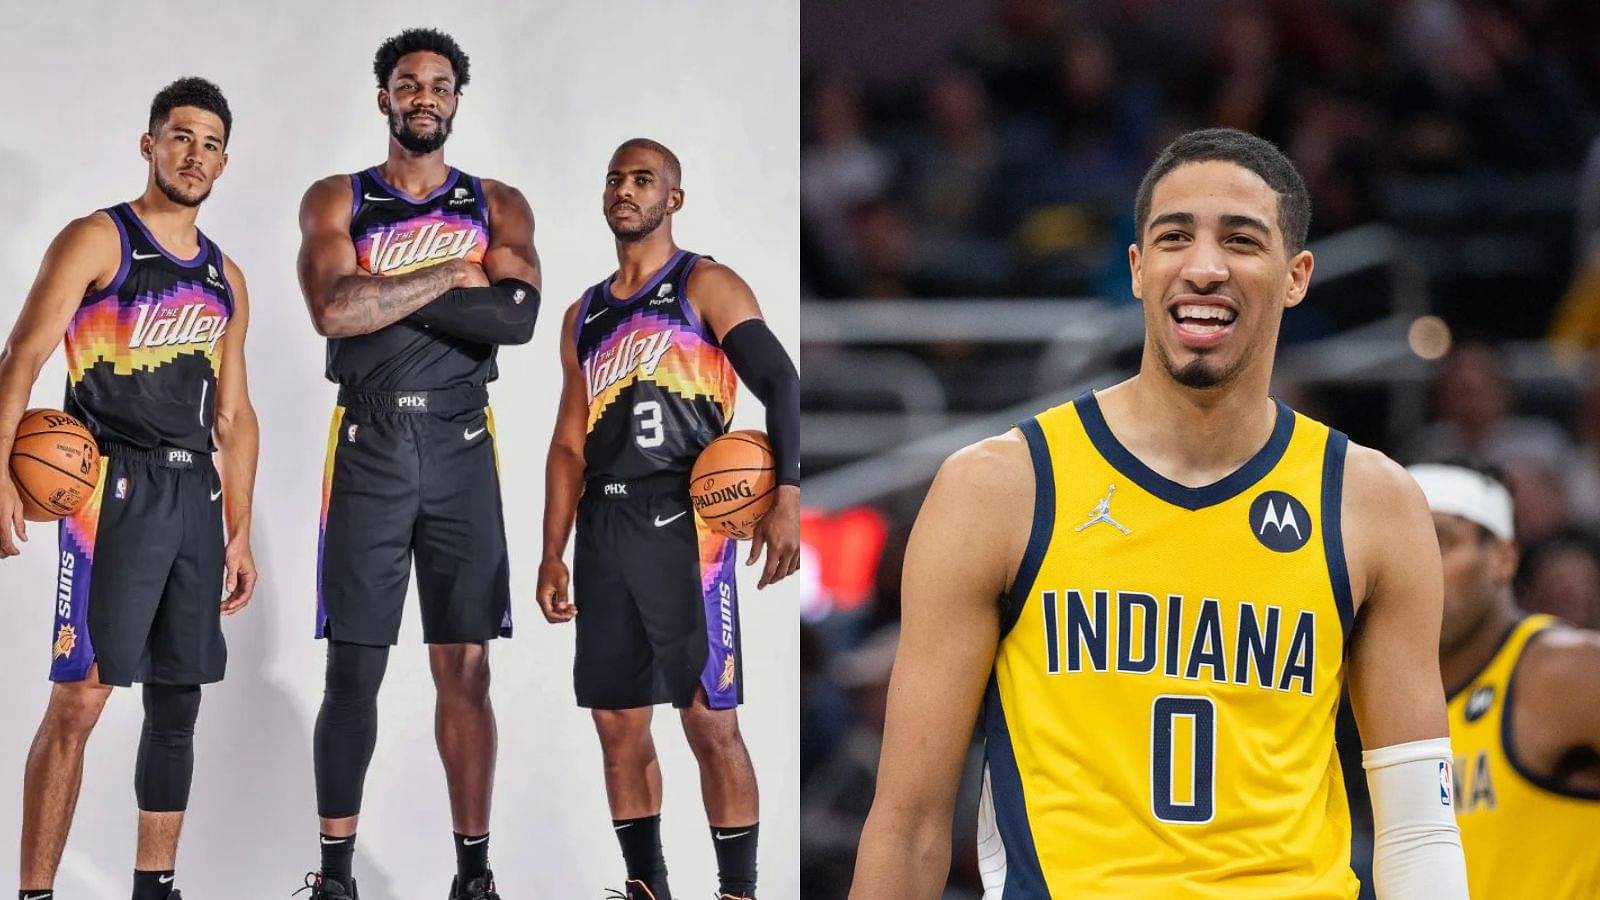 “There might be a 6’5 Chris Paul waiting for Deandre Ayton in Indiana”: DA can run it back in Phoenix with CP3 this season and join Tyrese Haliburton and the Pacers next season